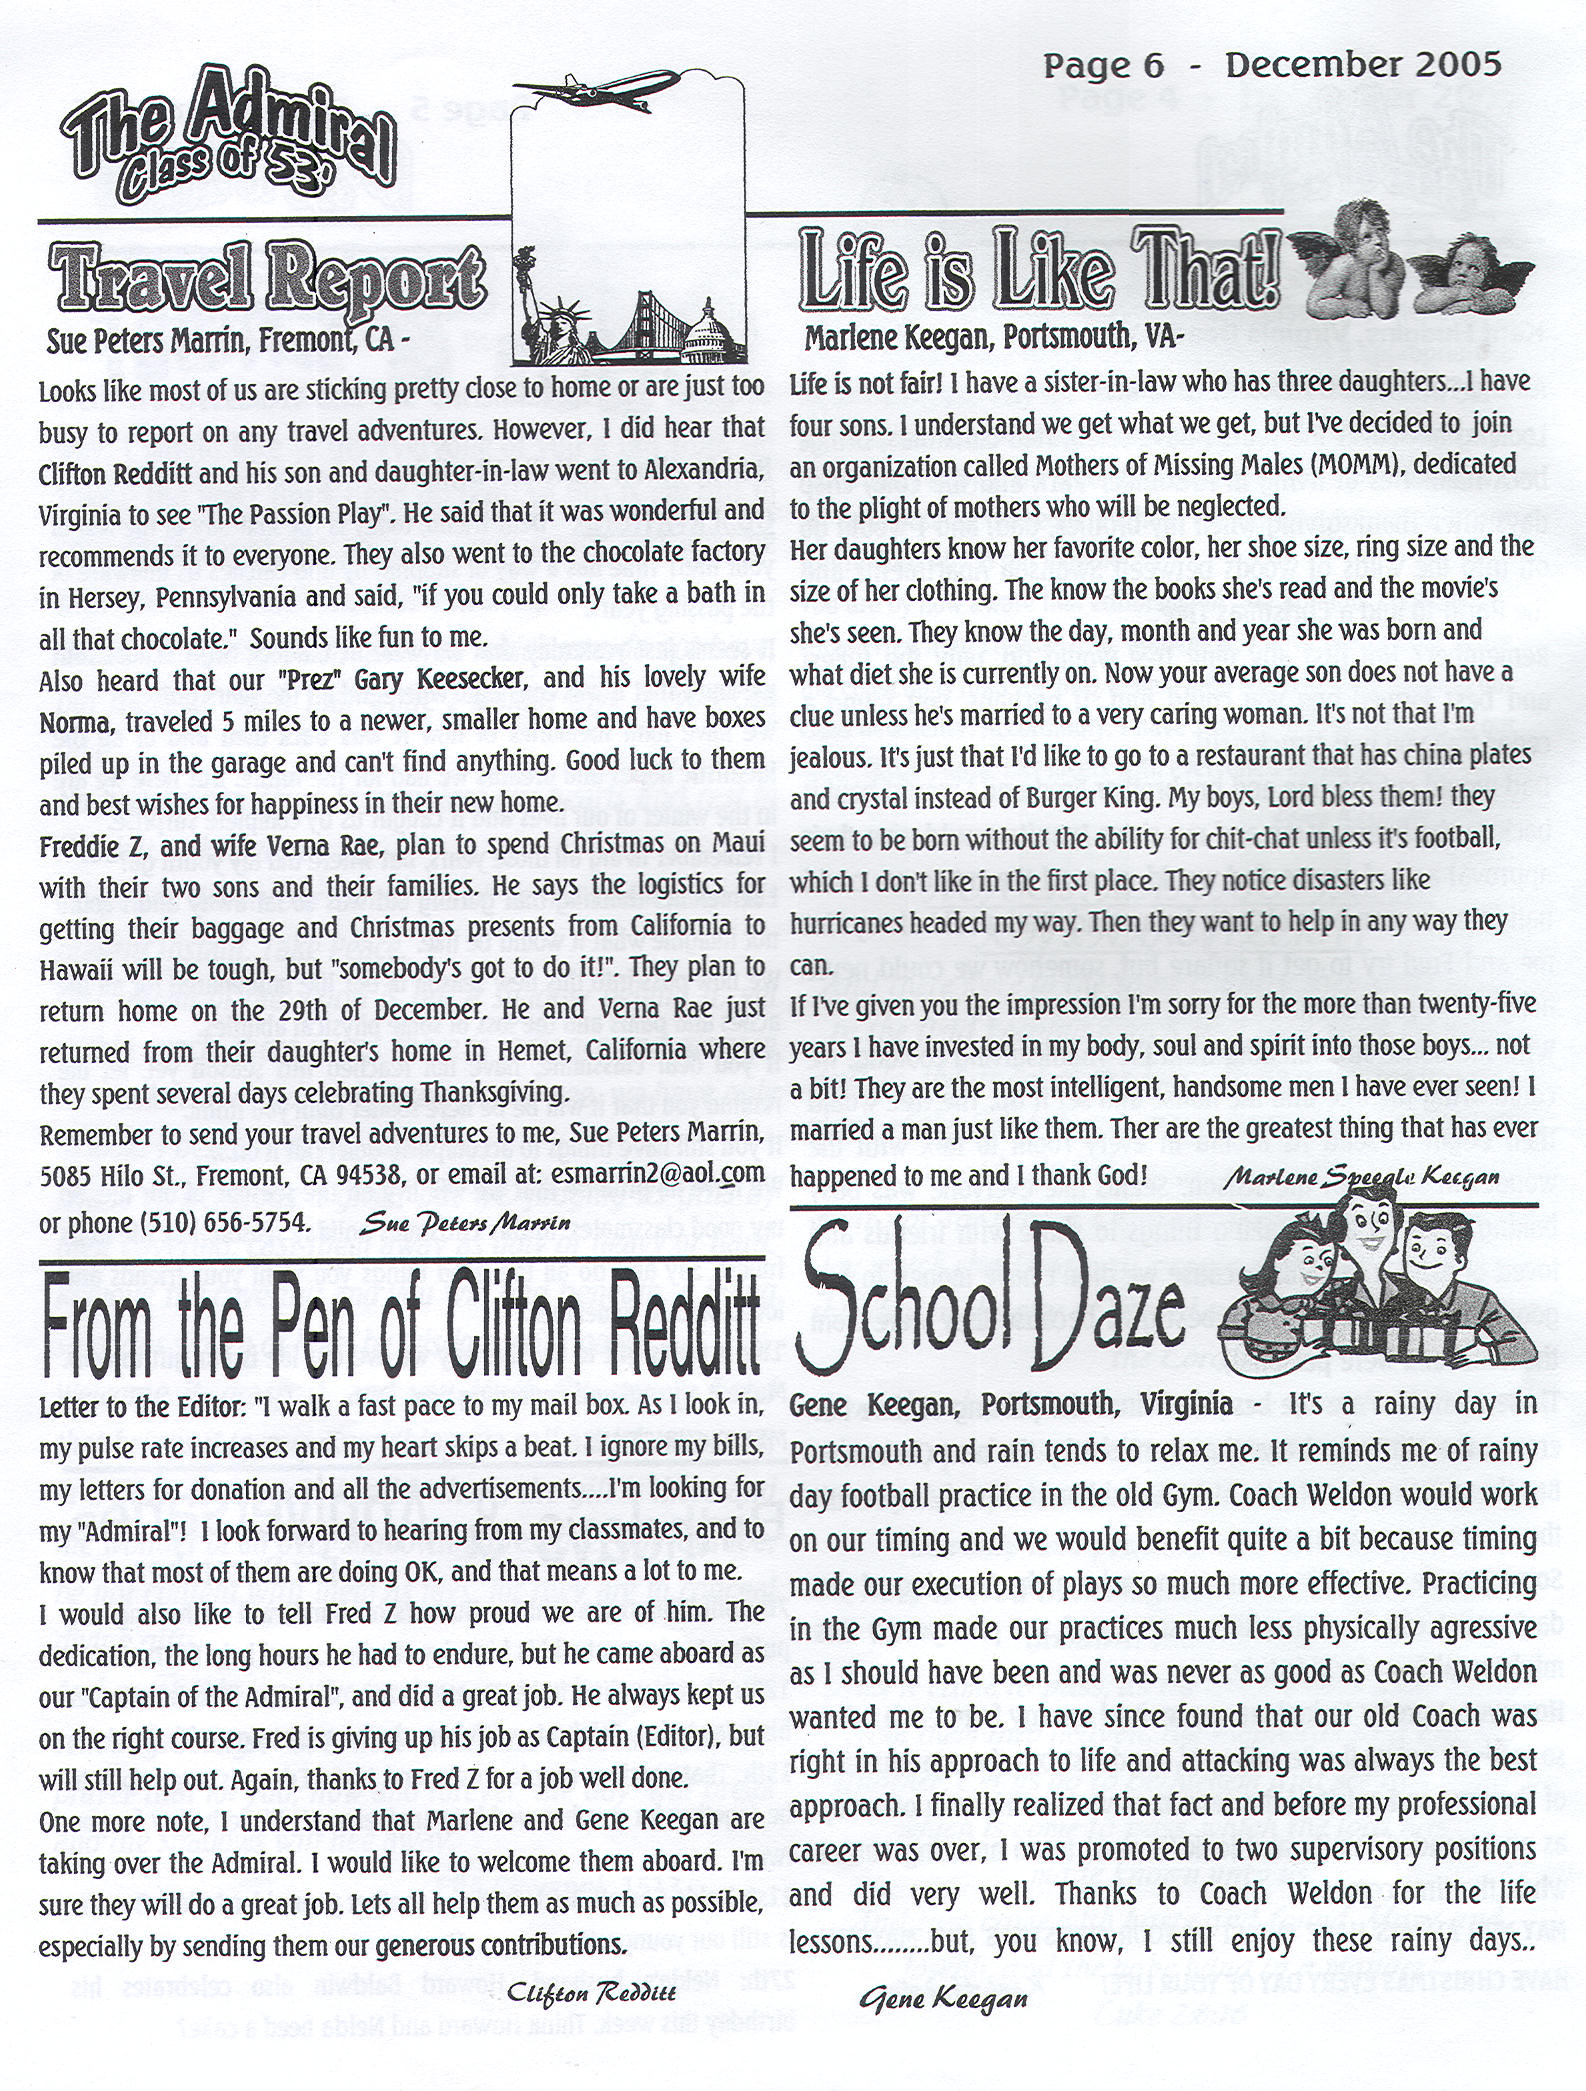 The Admiral - December 2005 - pg. 6